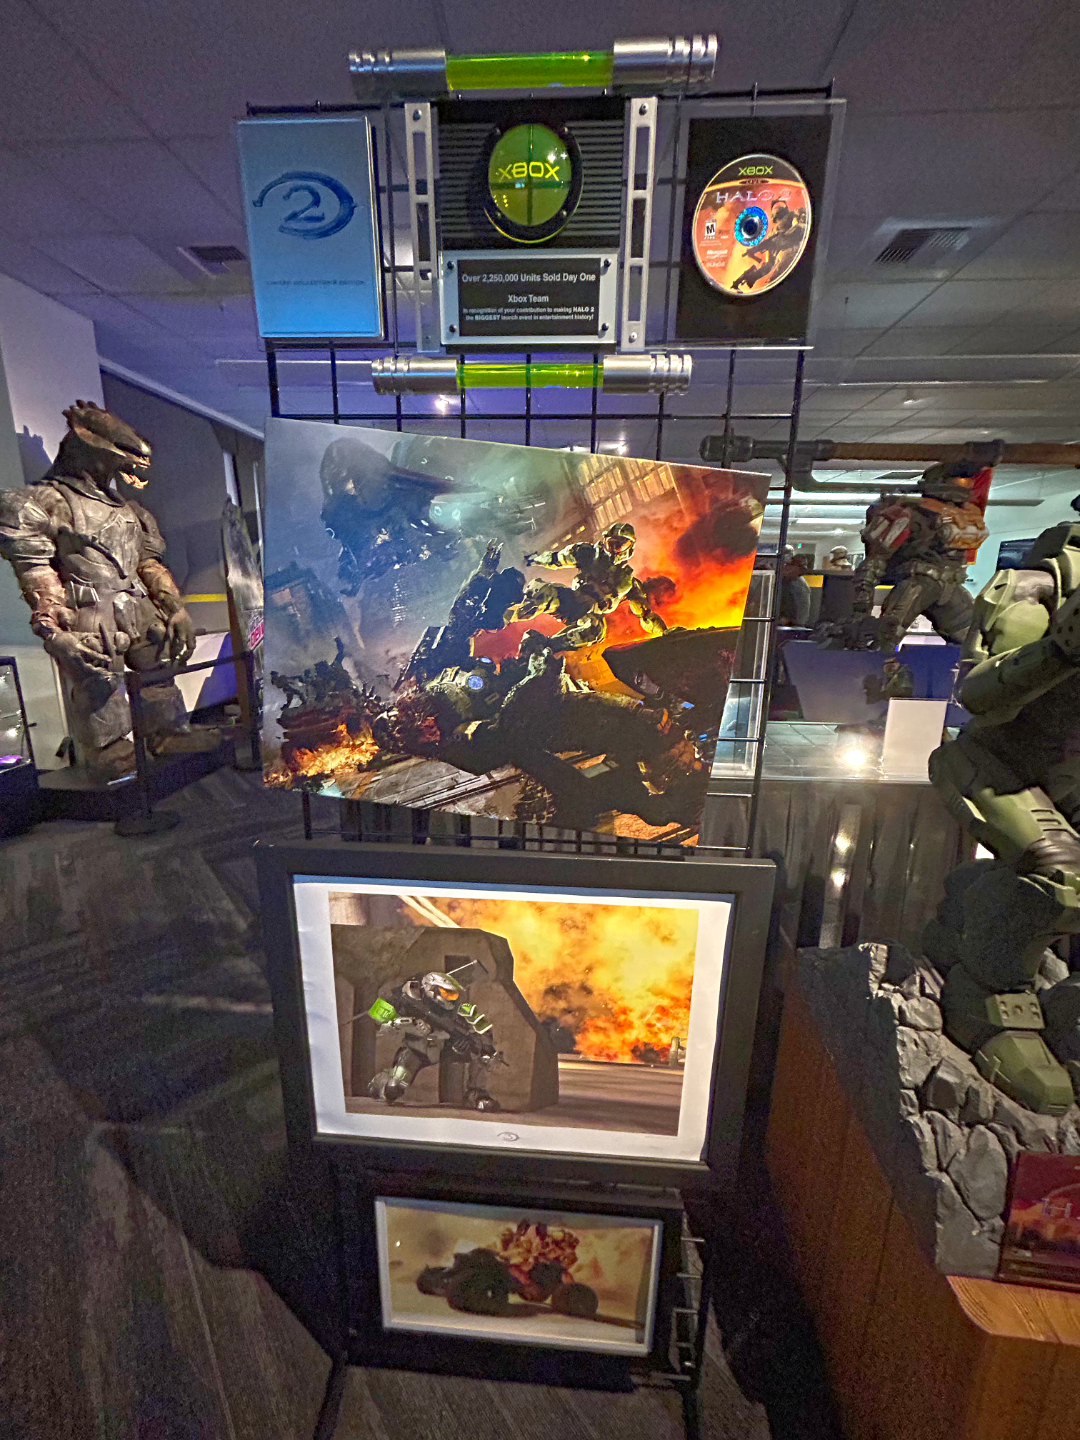 Halo art and plaque from the Xbox team